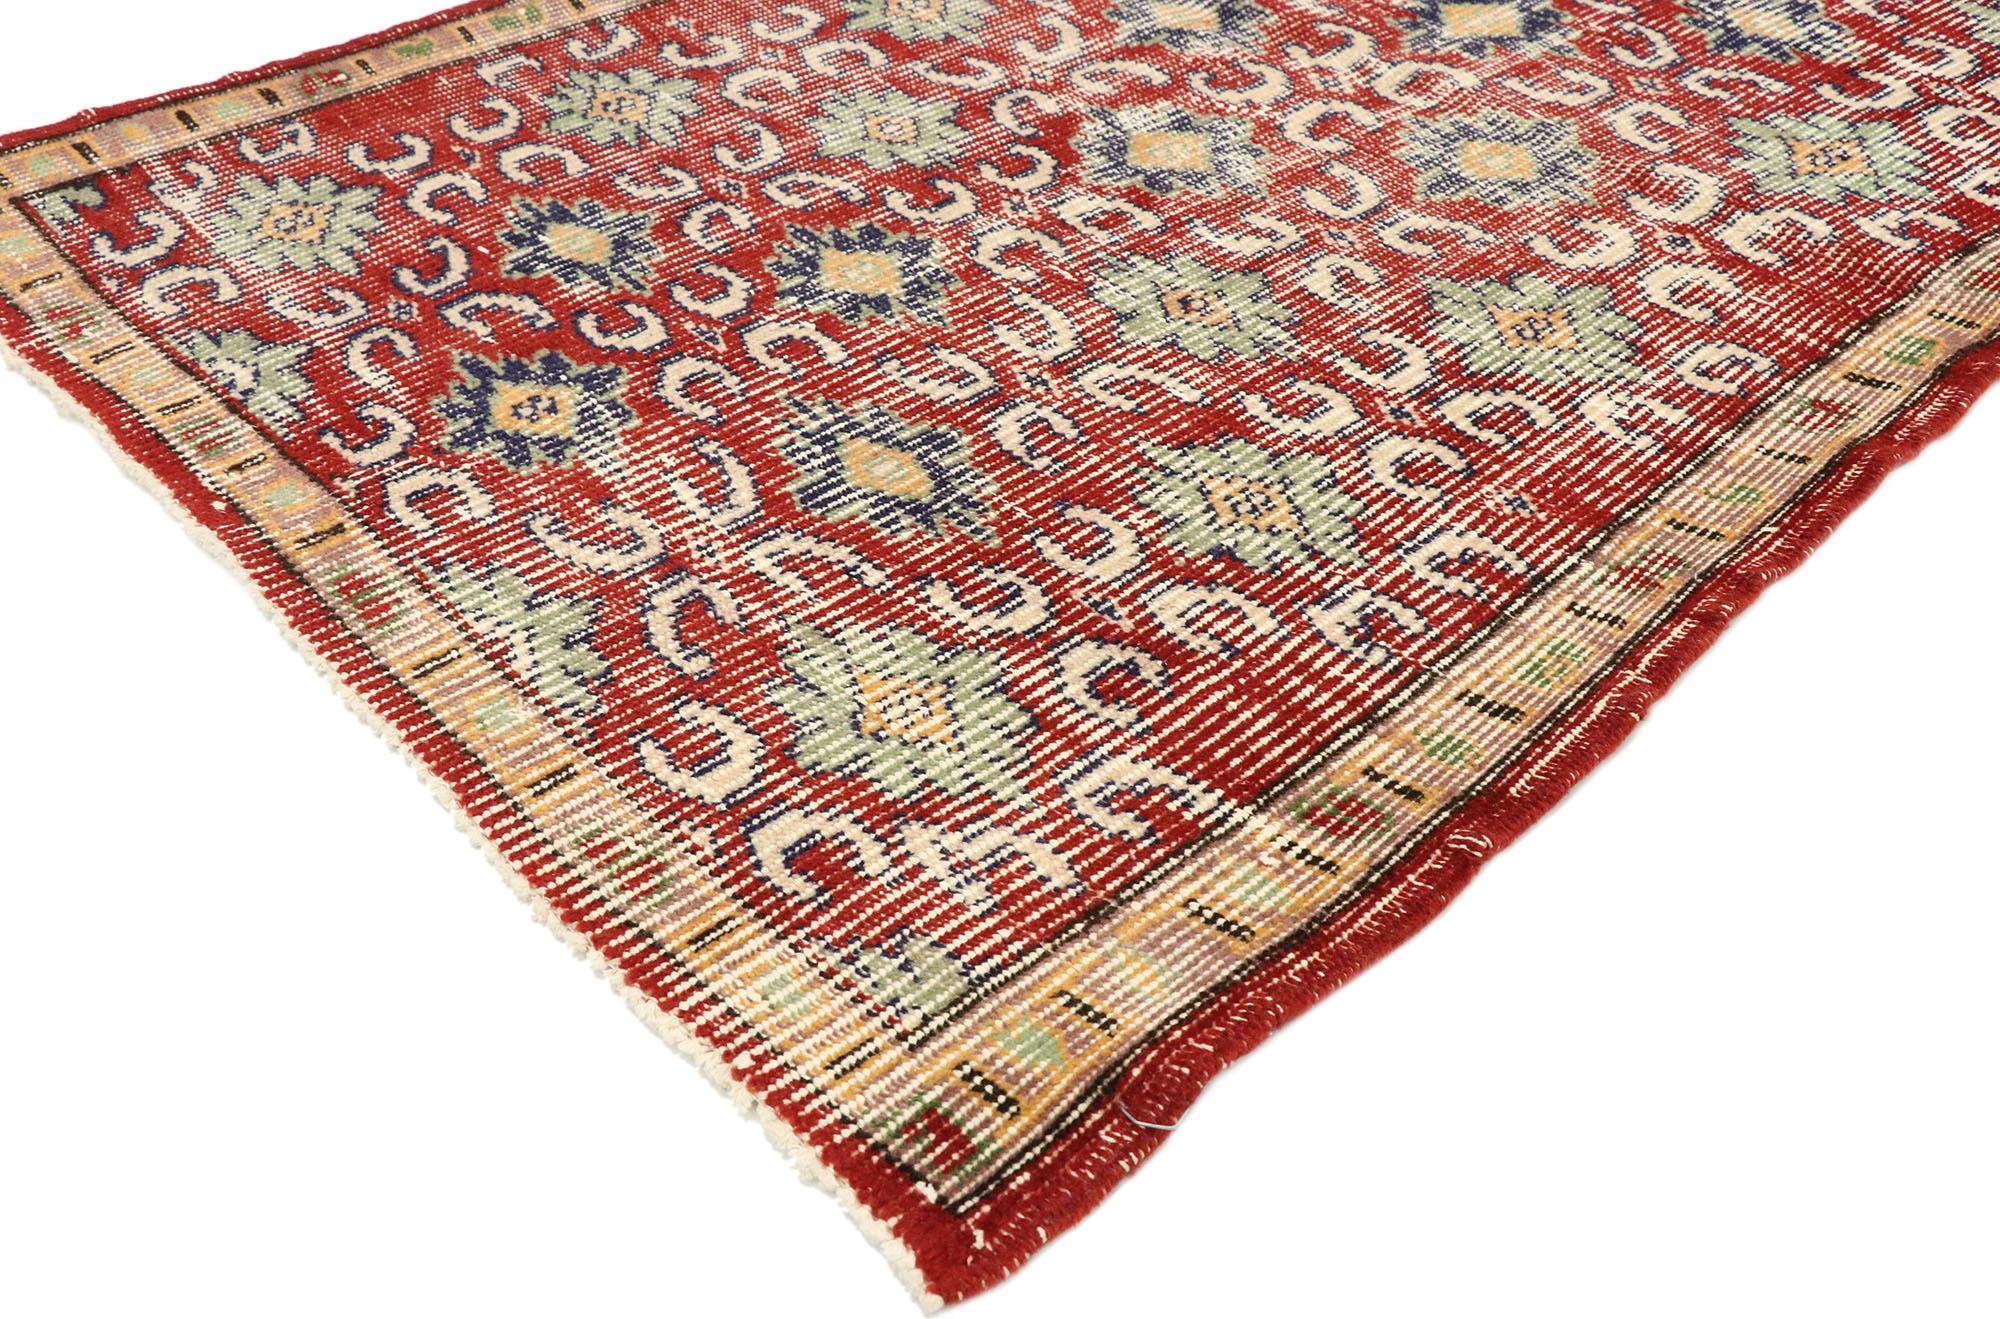 51896, Zeki Muren distressed vintage Turkish Sivas rug with modern rustic English style. Warm and inviting with a lovingly time-worn composition, this hand knotted wool distressed vintage Turkish Sivas rug beautifully embodies a modern rustic